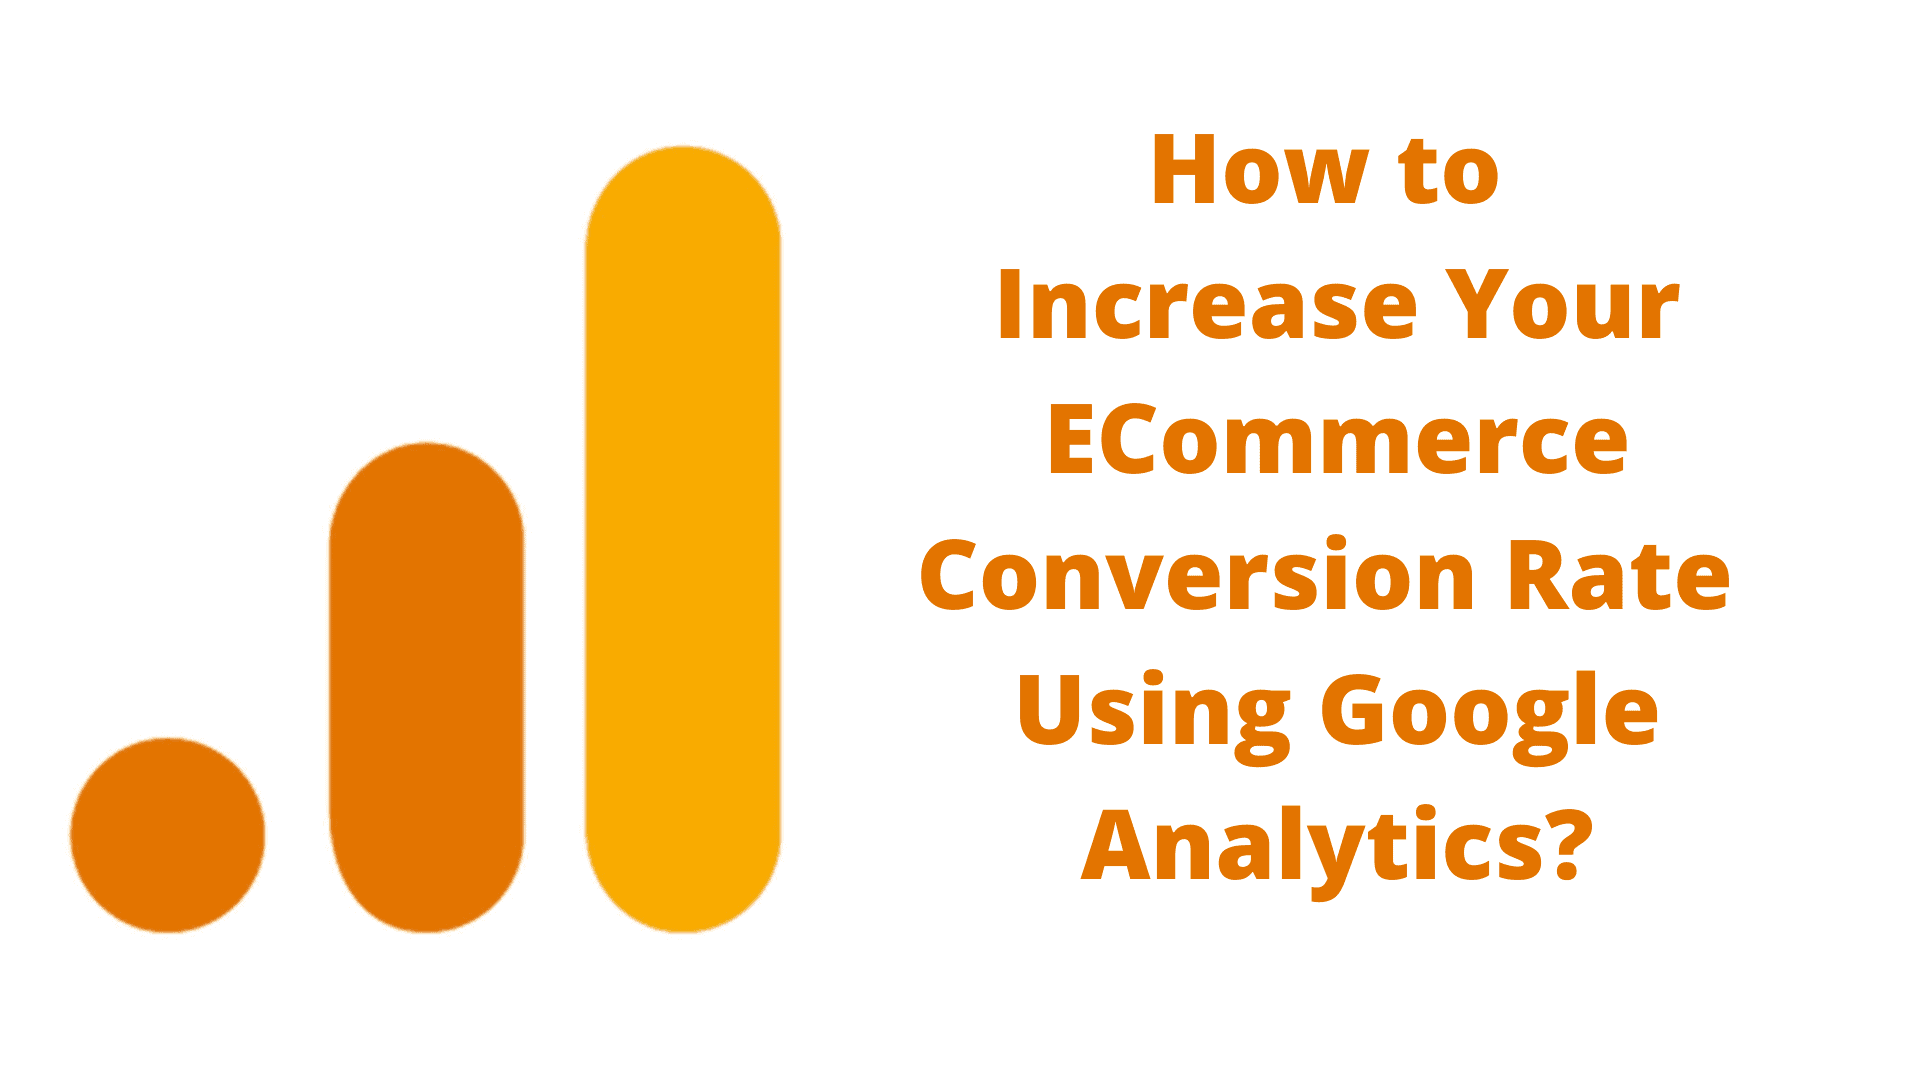 How to Increase Your ECommerce Conversion Rate Using Google Analytics